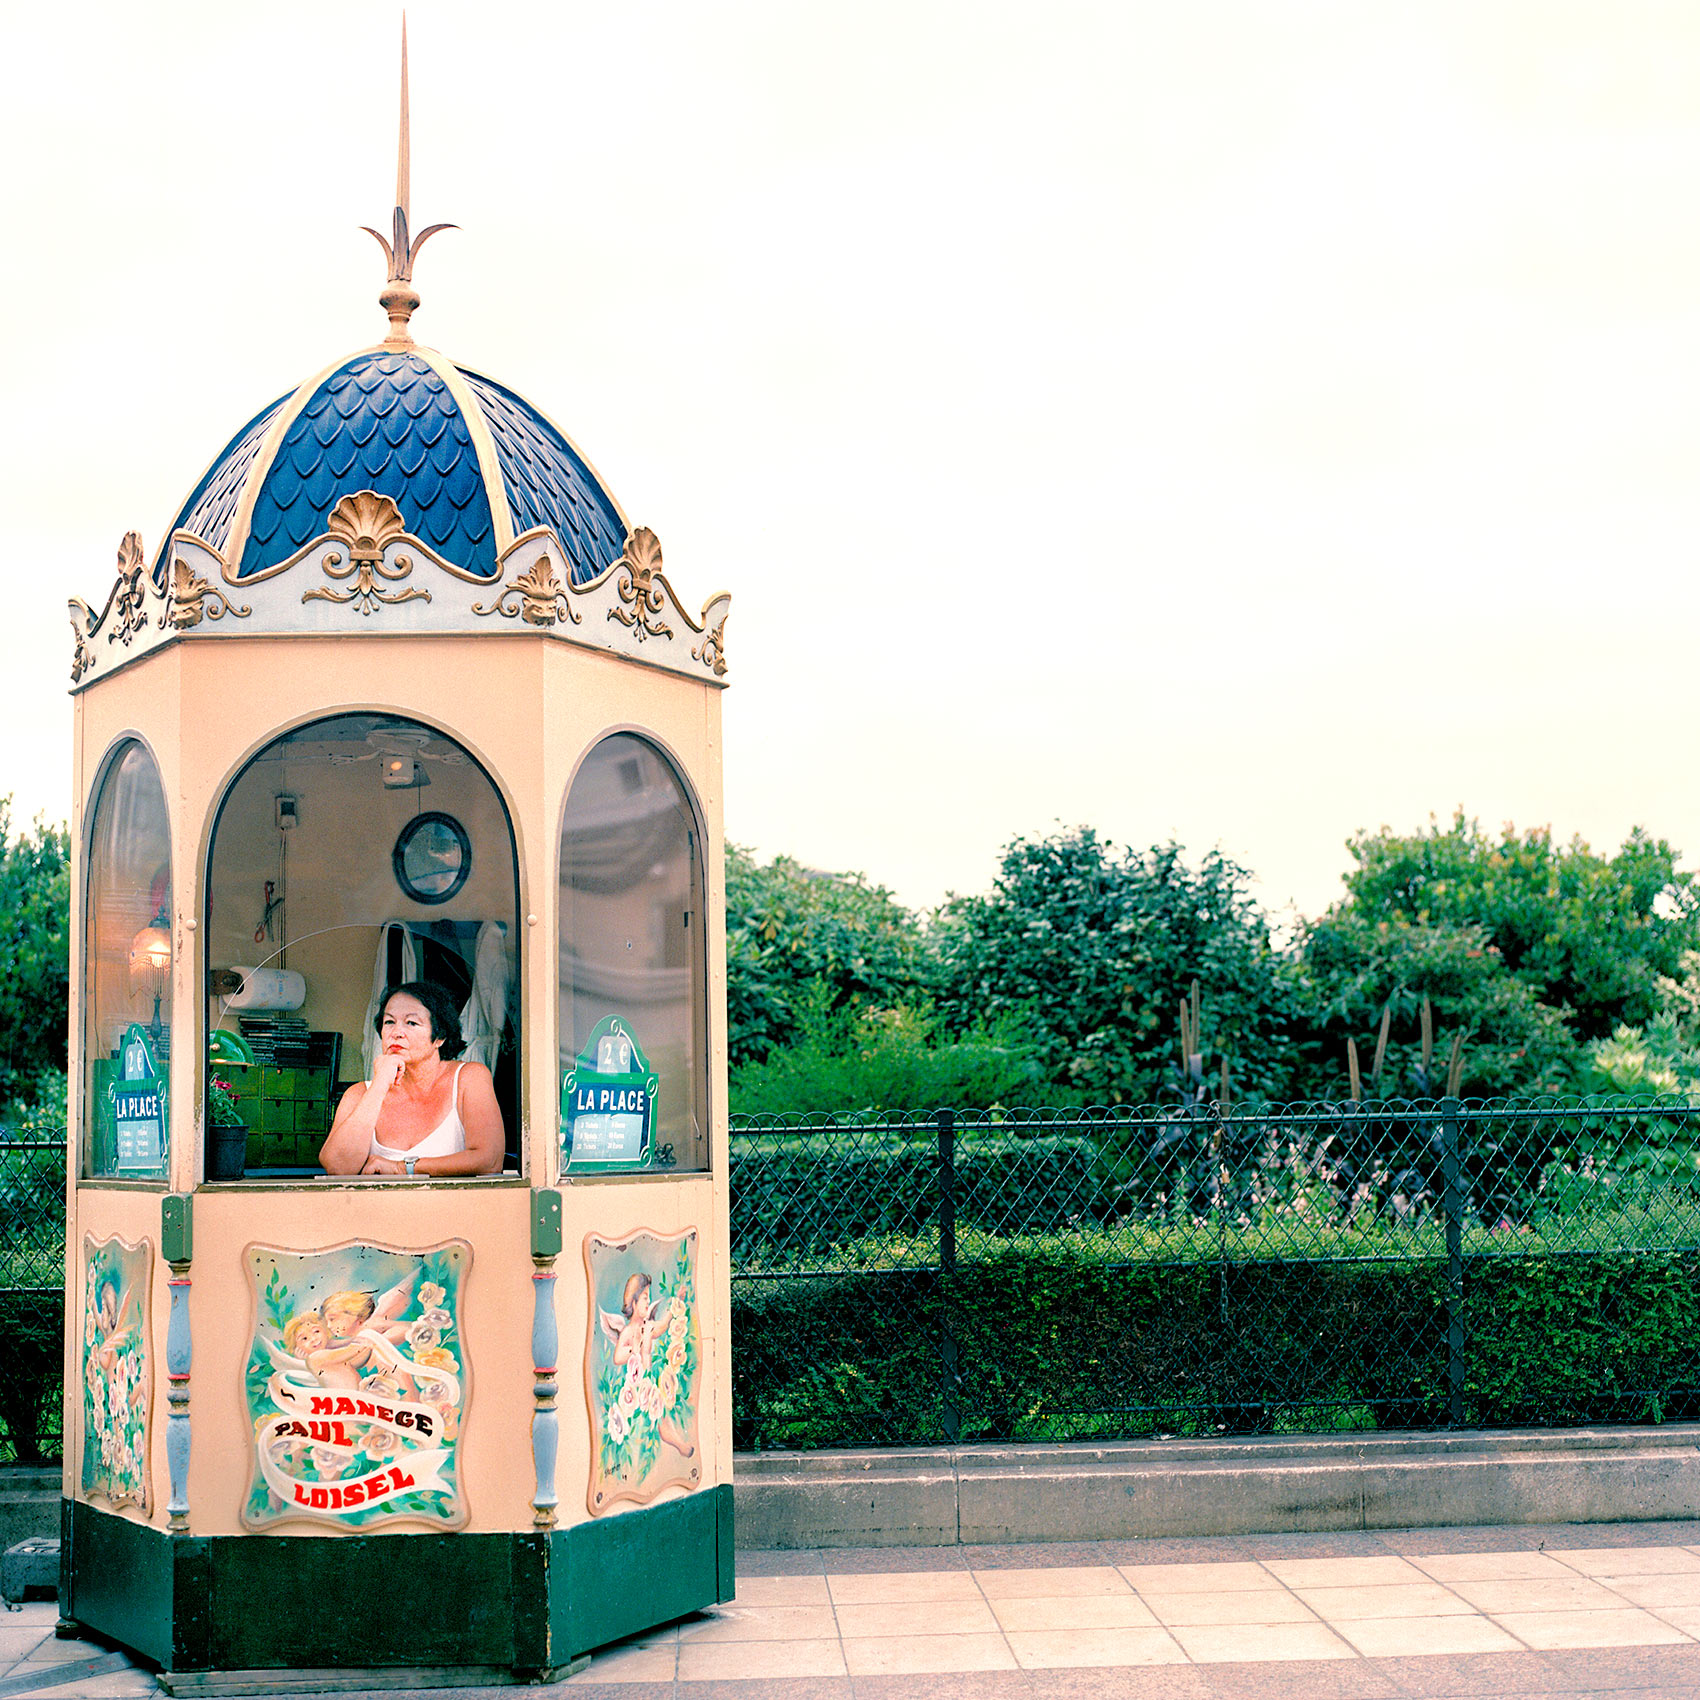 a woman waits in her ornate ticket booth for merry go round customers in paris 